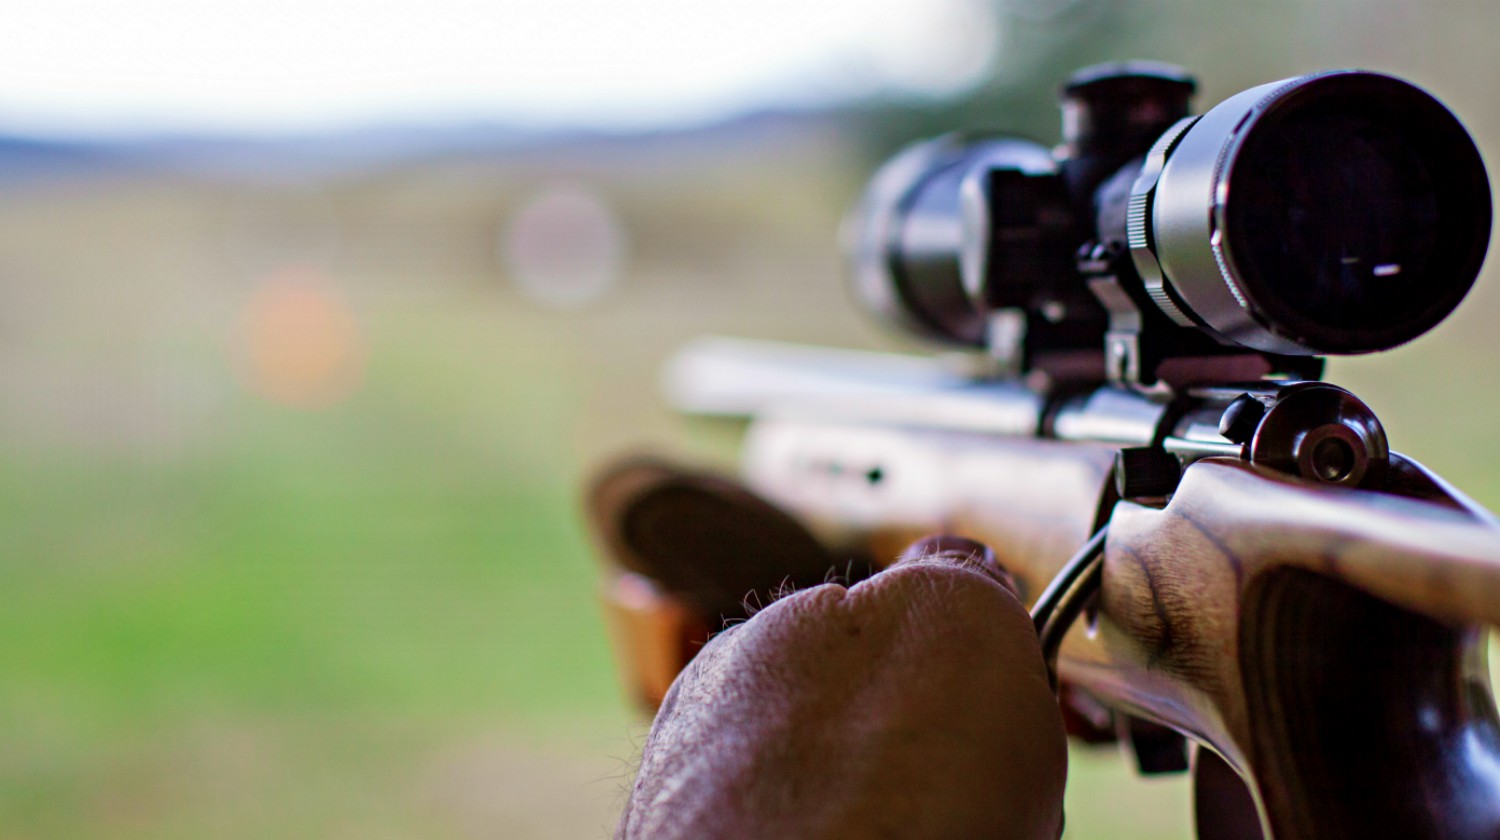 Feature | A shooter sighting in the target | The 22 Rifle In All Its Glory